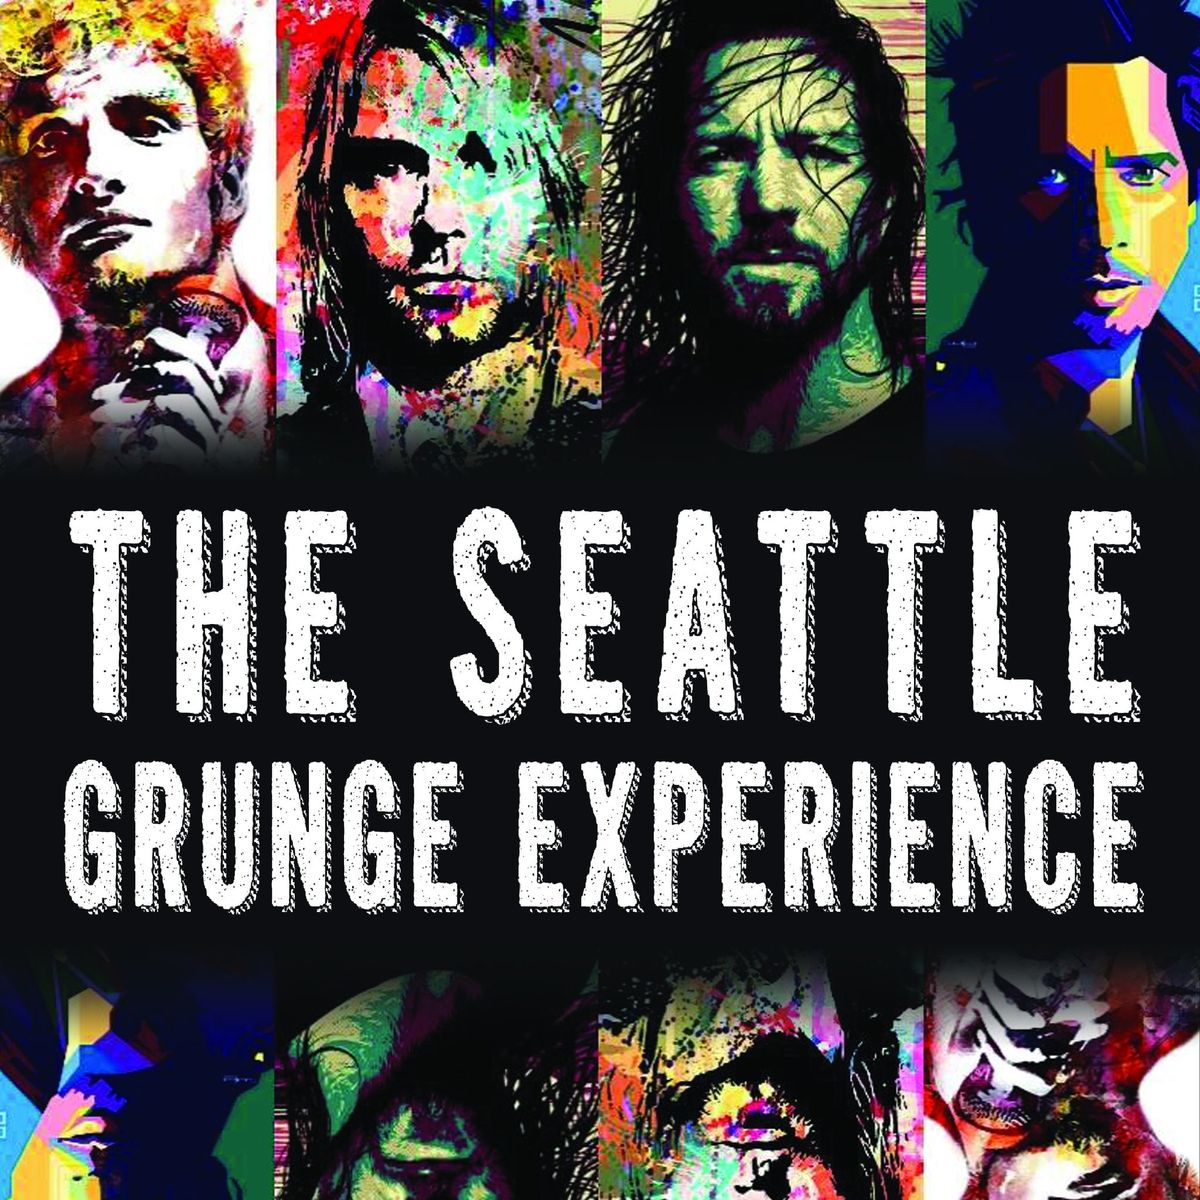 Seattle Grunge XP - DUBLIN - All Ages 1:30pm \/ Over 18s 7pm